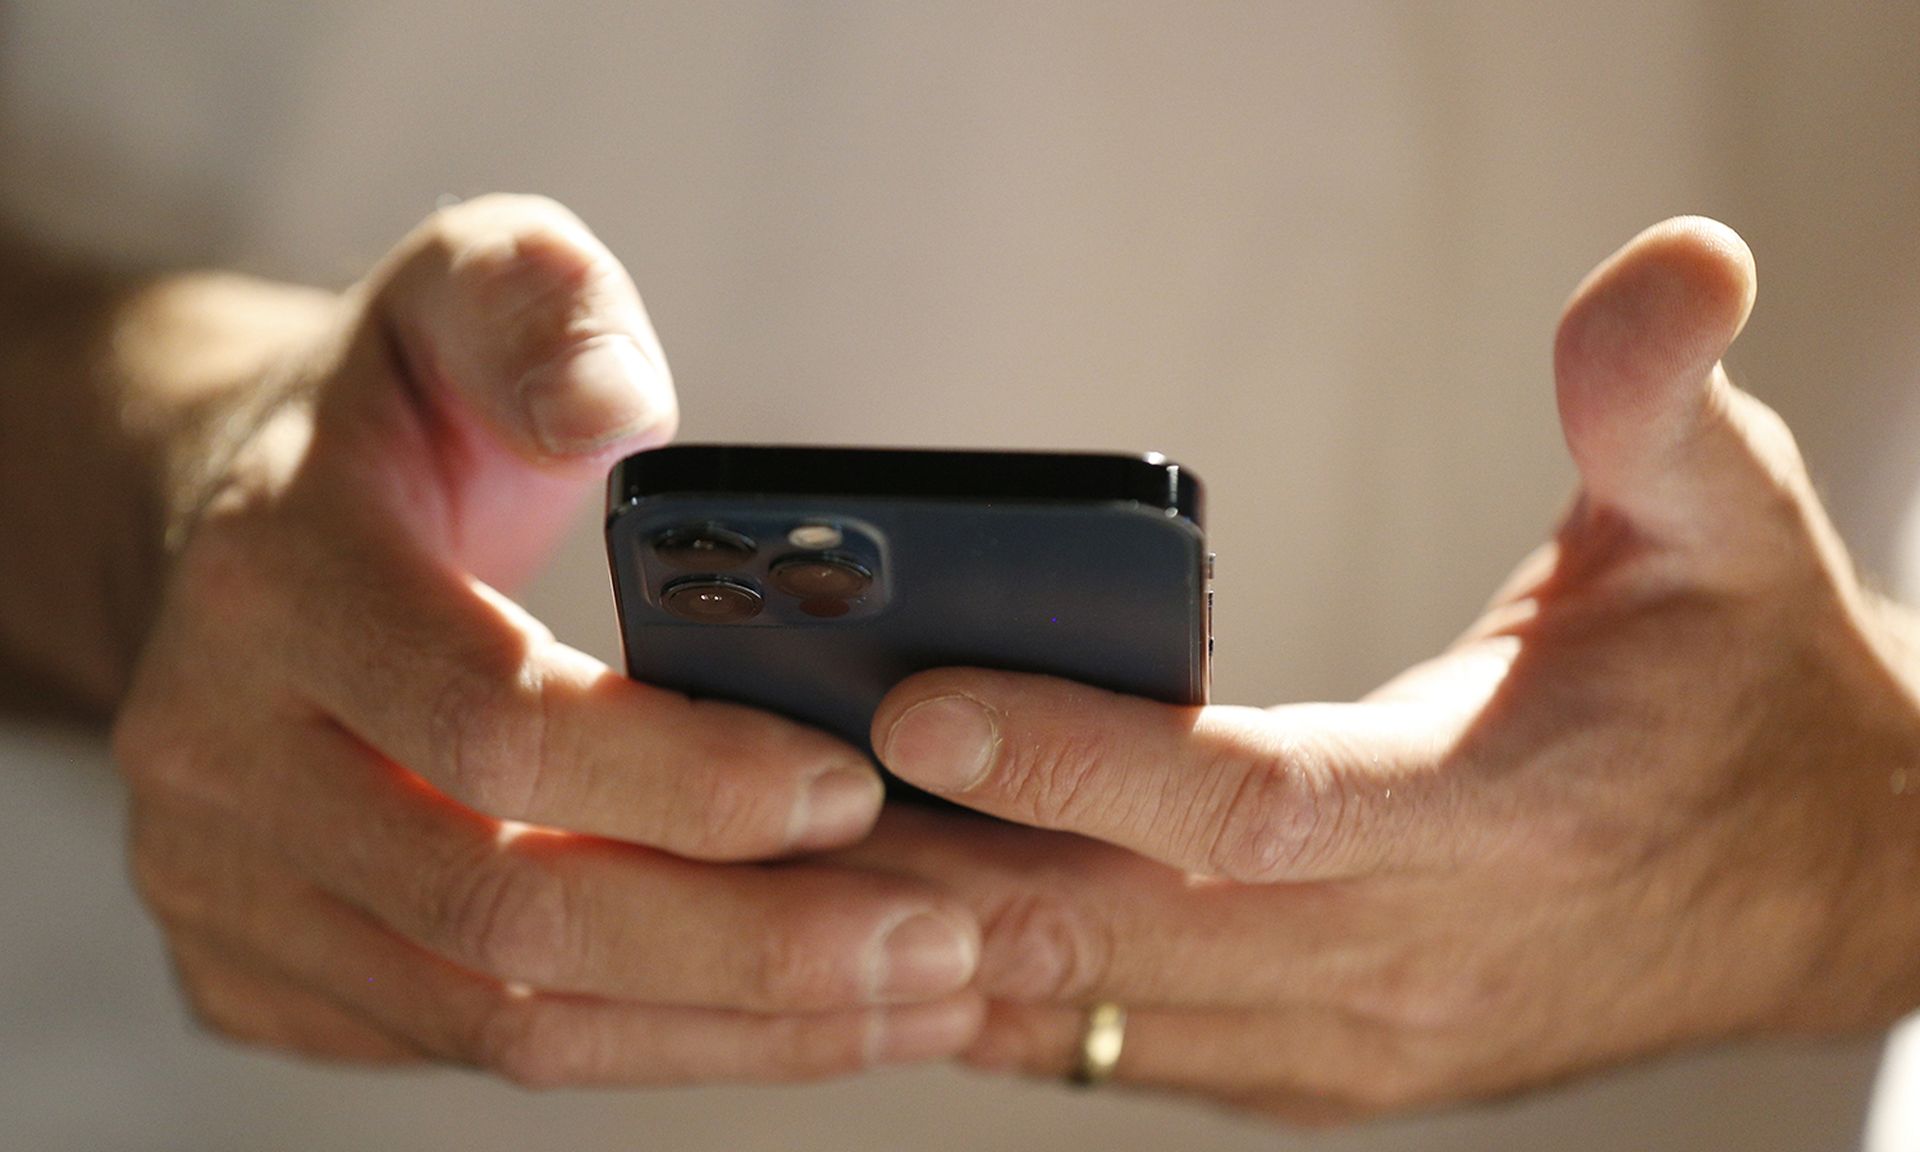 A man's hands hold a smartphone